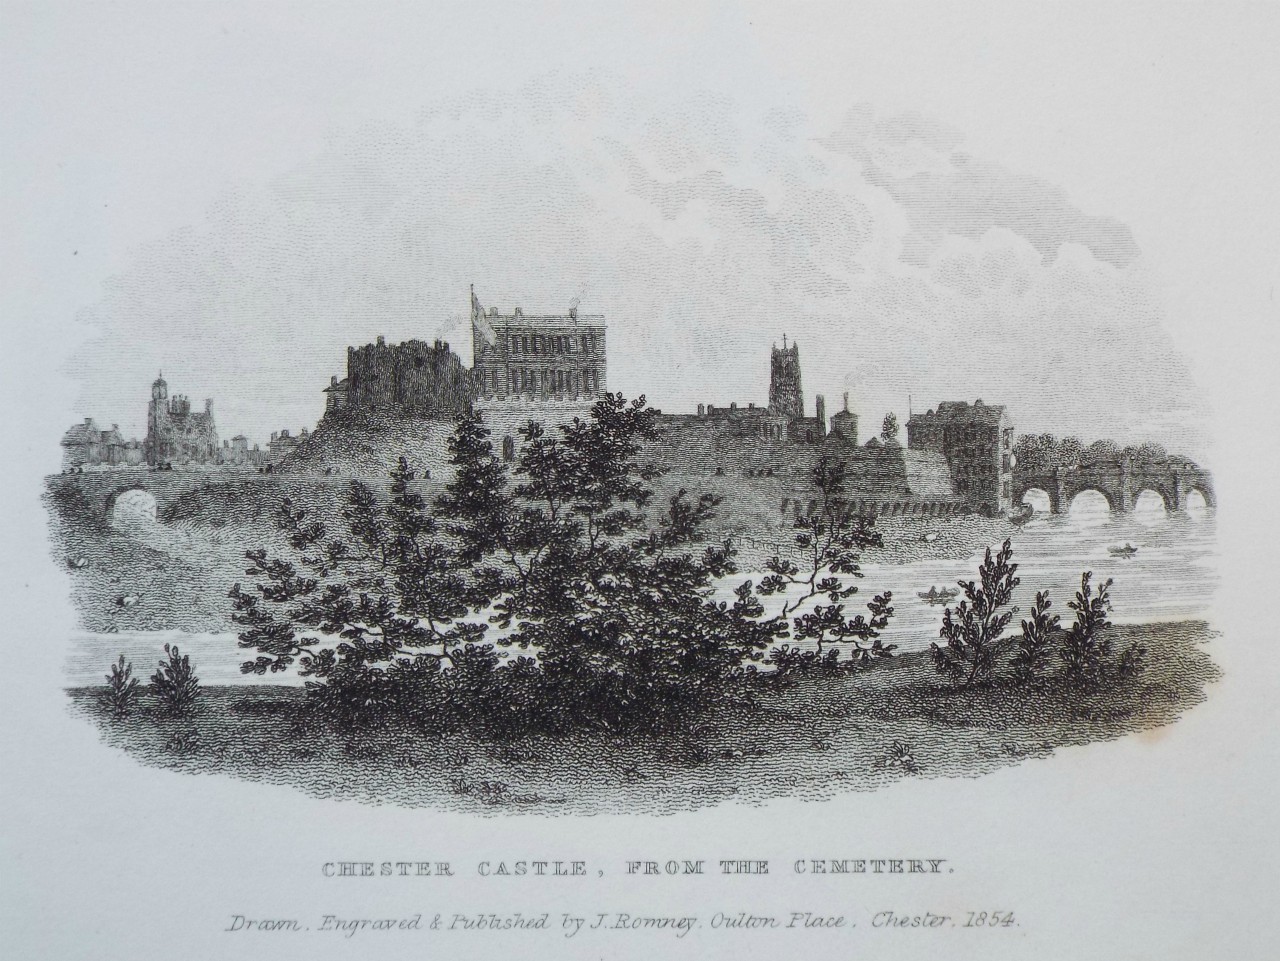 Print - Chester Castle, from the Cemetery. - Romney